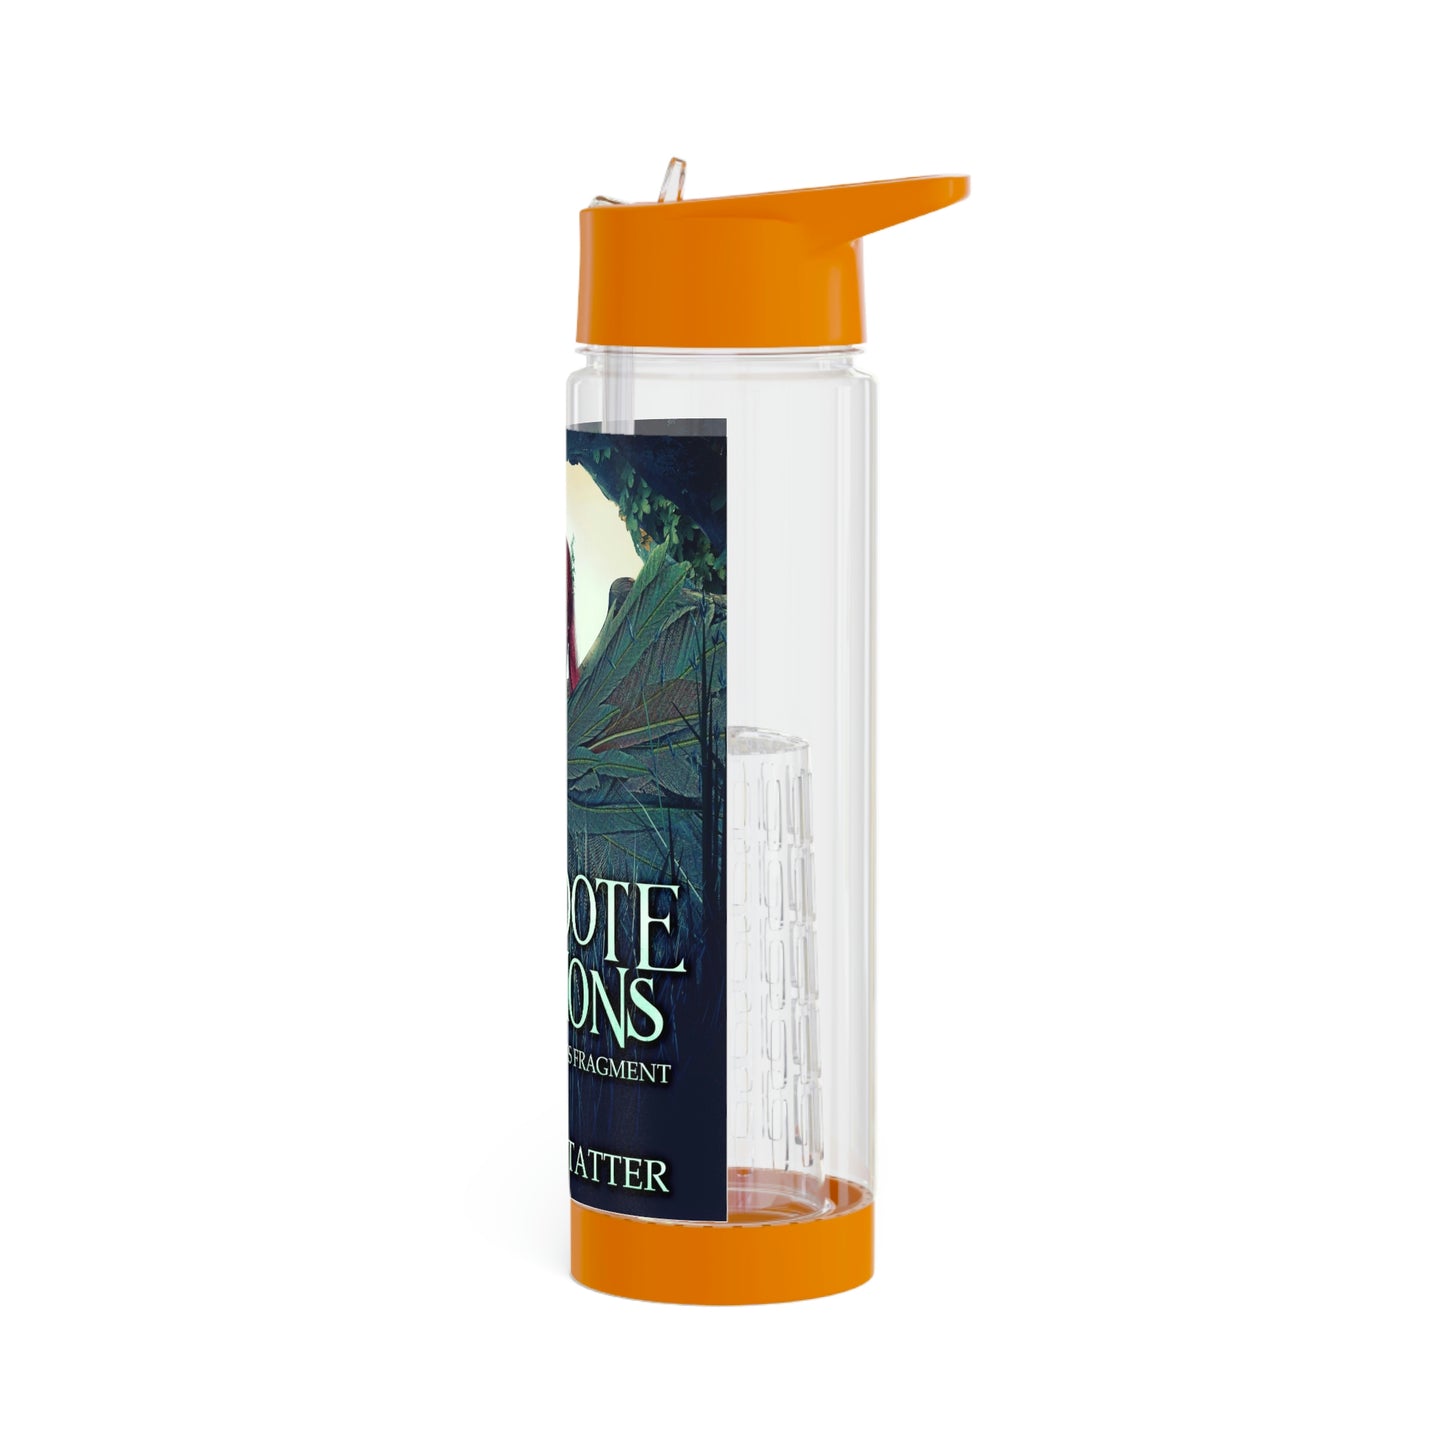 Antidote Illusions - Infuser Water Bottle